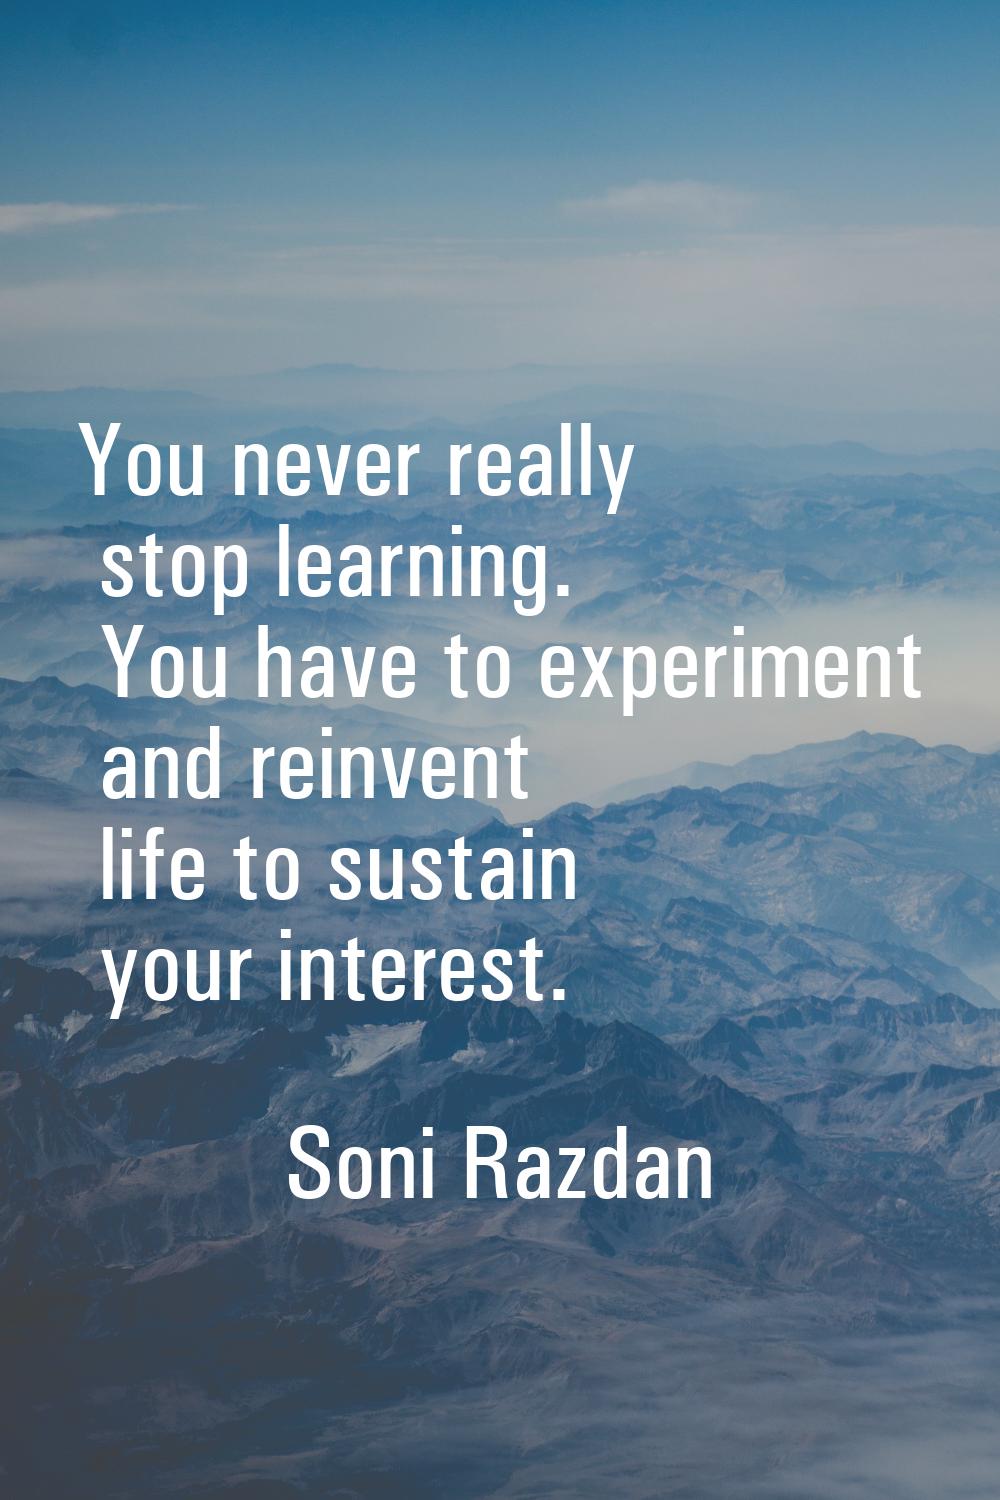 You never really stop learning. You have to experiment and reinvent life to sustain your interest.